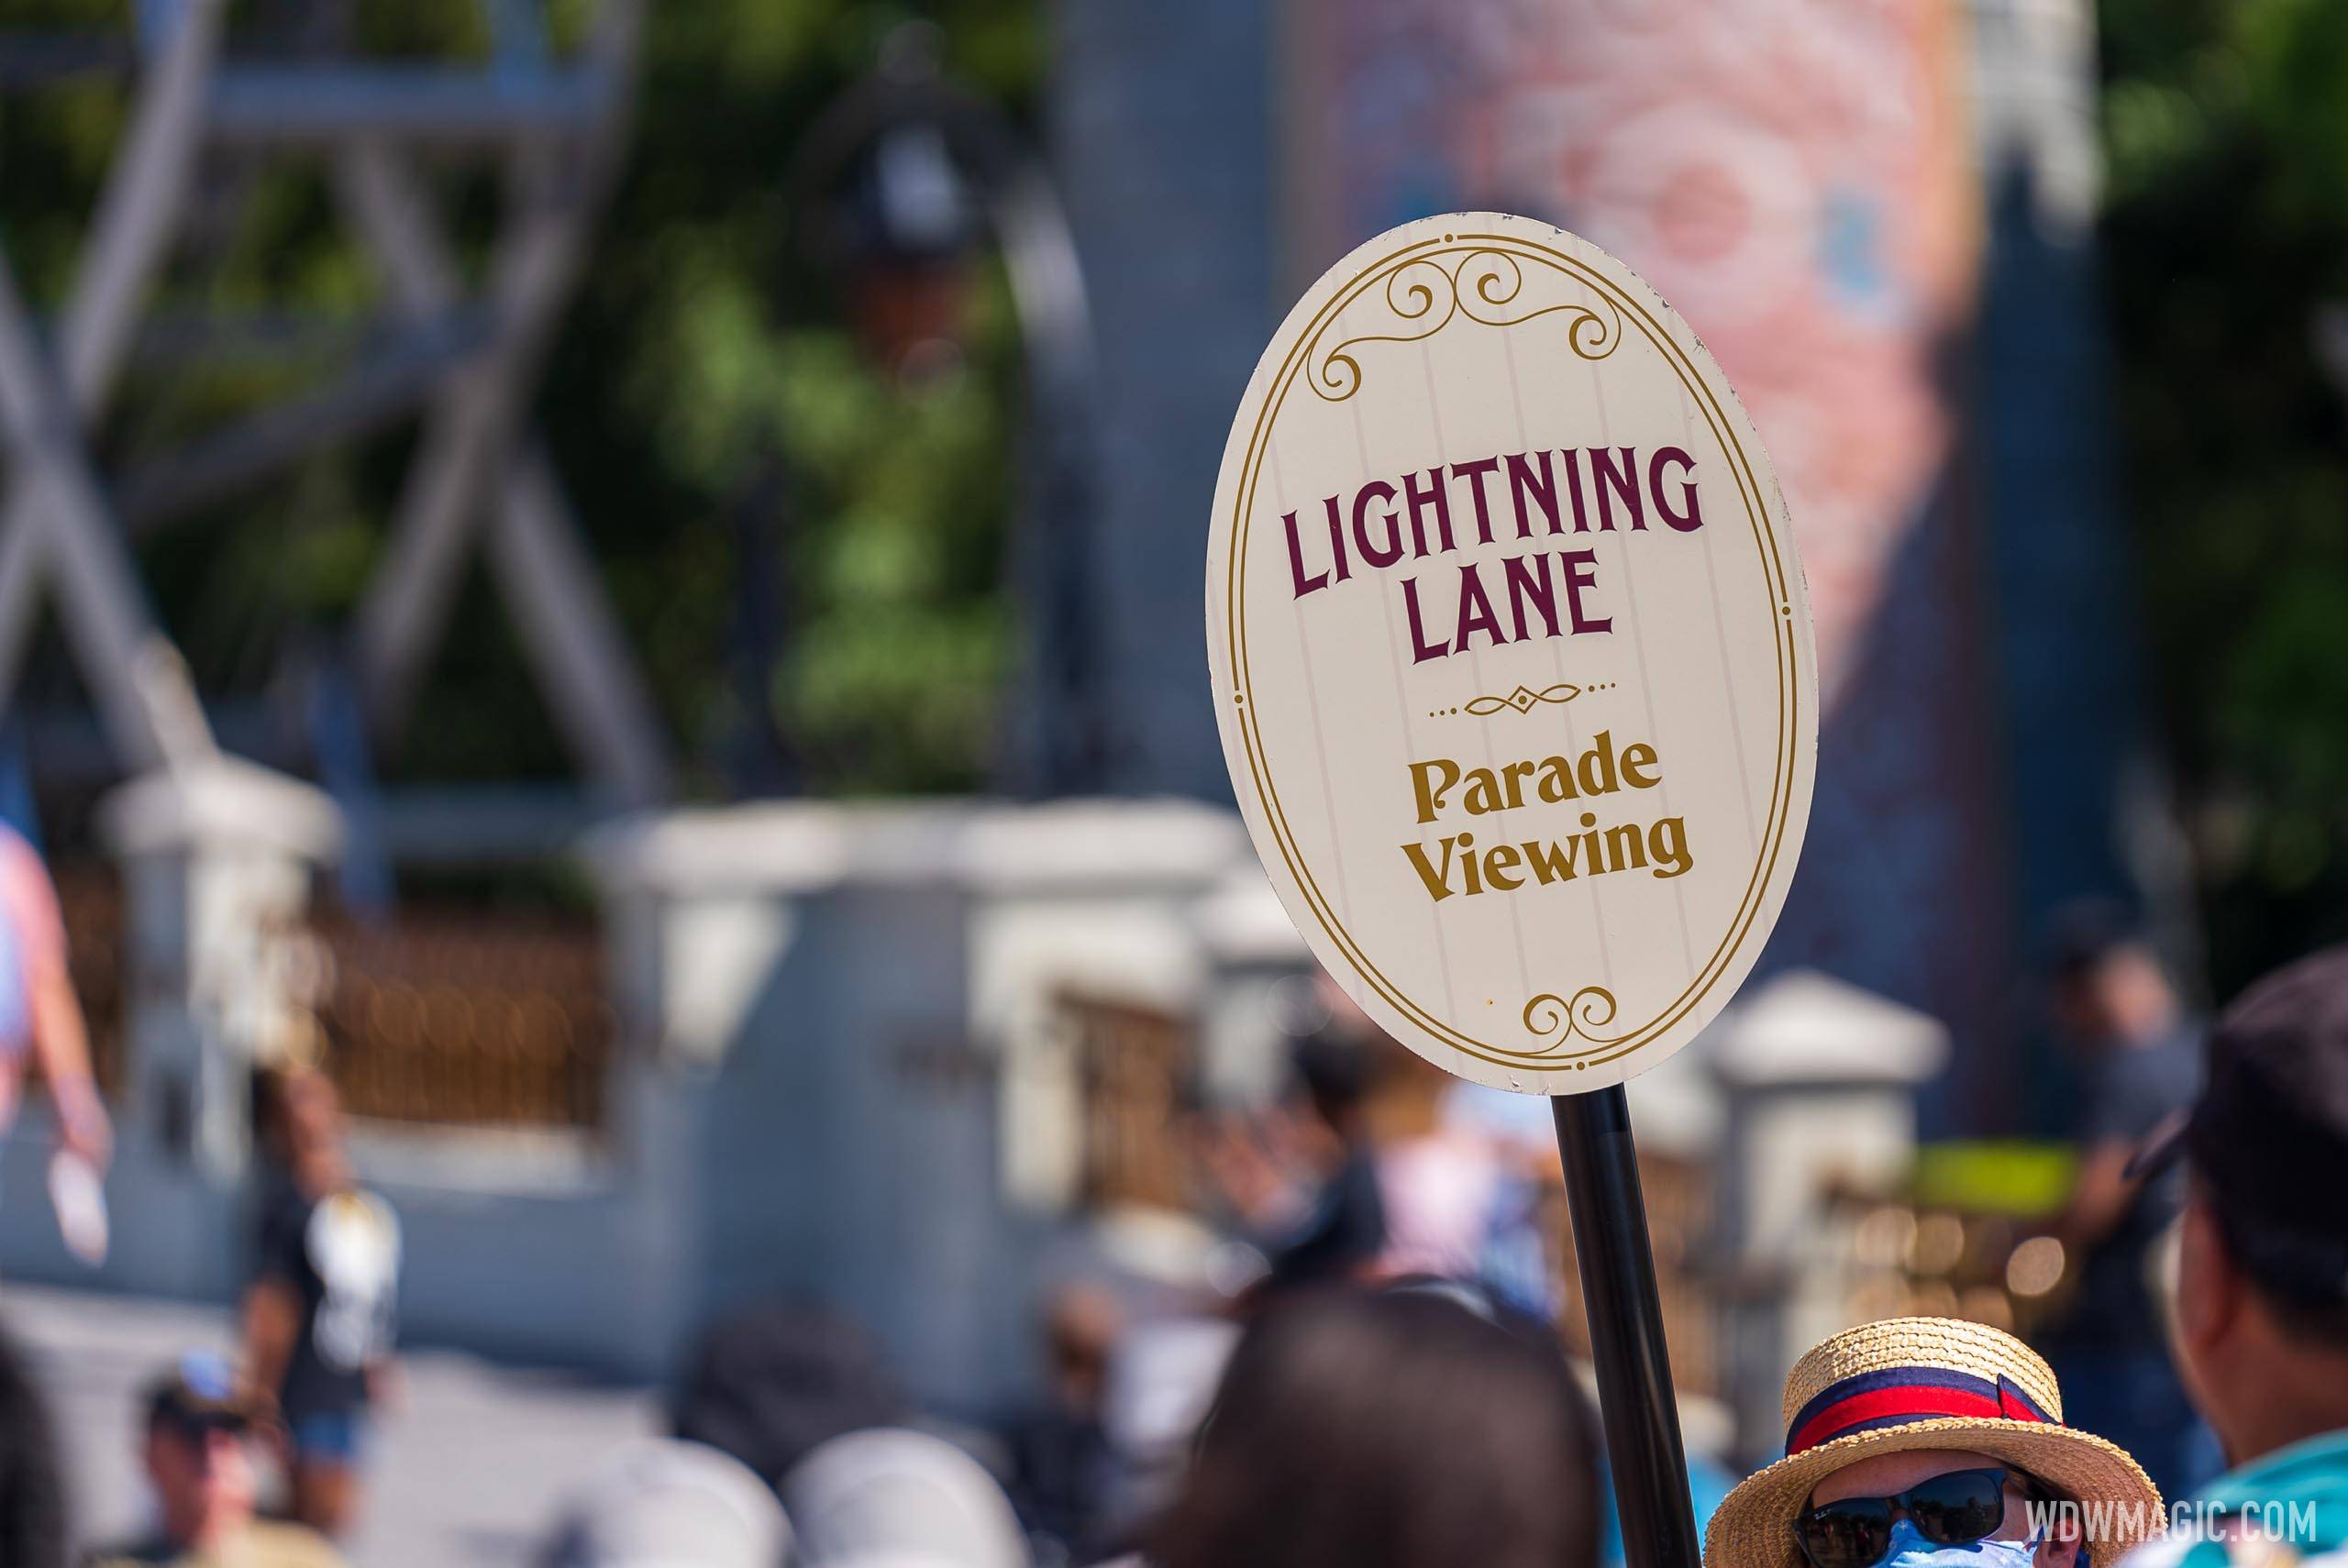 Signage to enter the Festival of Fantasy Parade Lighting Lane viewing area